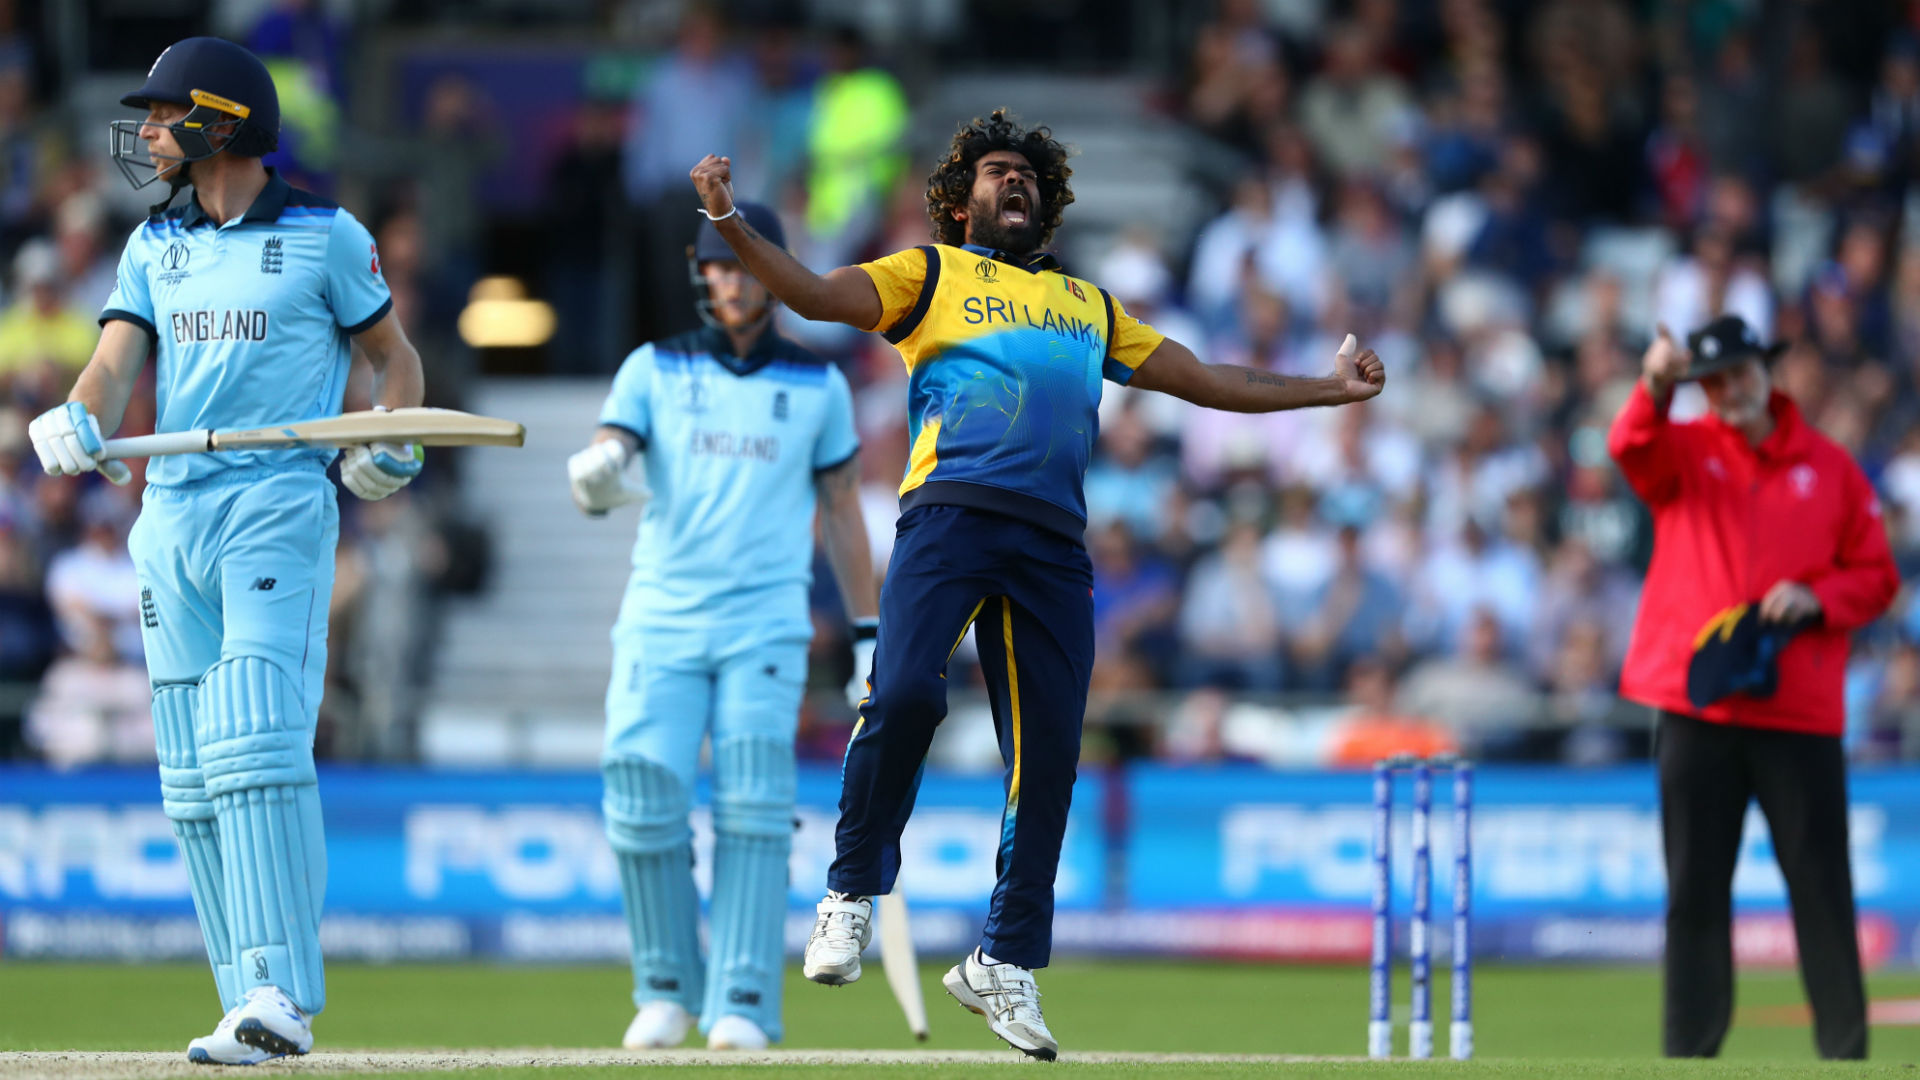 Sri Lanka paceman Lasith Malinga has taken 335 wickets in 225 matches in an ODI career that has spanned 15 years.